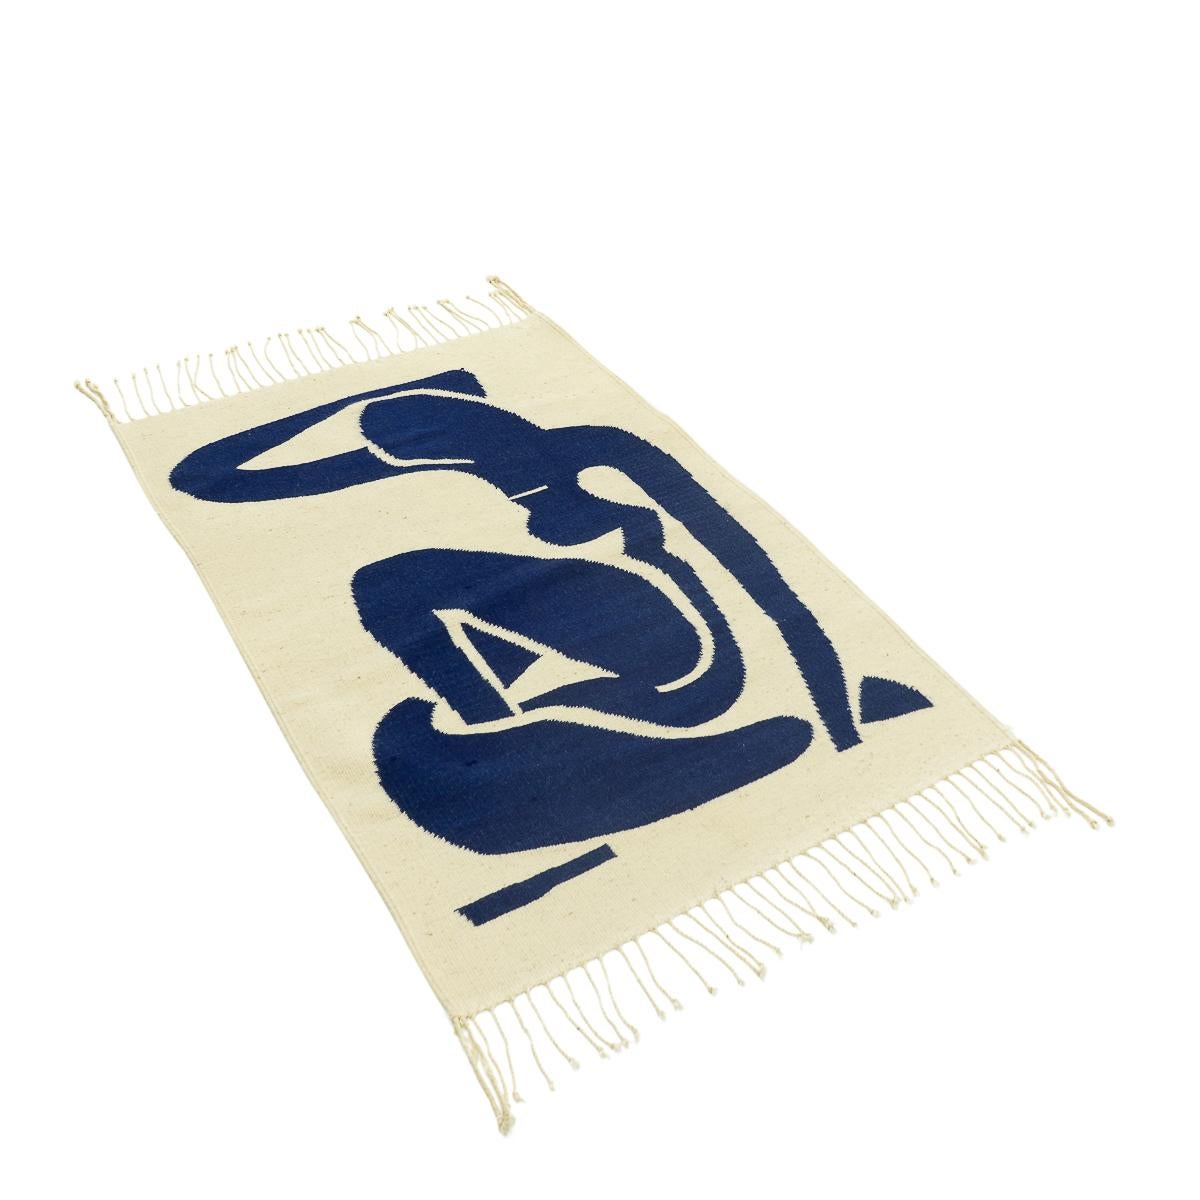 Tapestry in a heavy rough wool after the Blue Nude lithographs by Henri Matisse.

Condition: Overall good condition, minor pilling, no stains or damages. 

Materials: Wool

Origination: 1970s, France



Approximate Dimensions:
(measurements